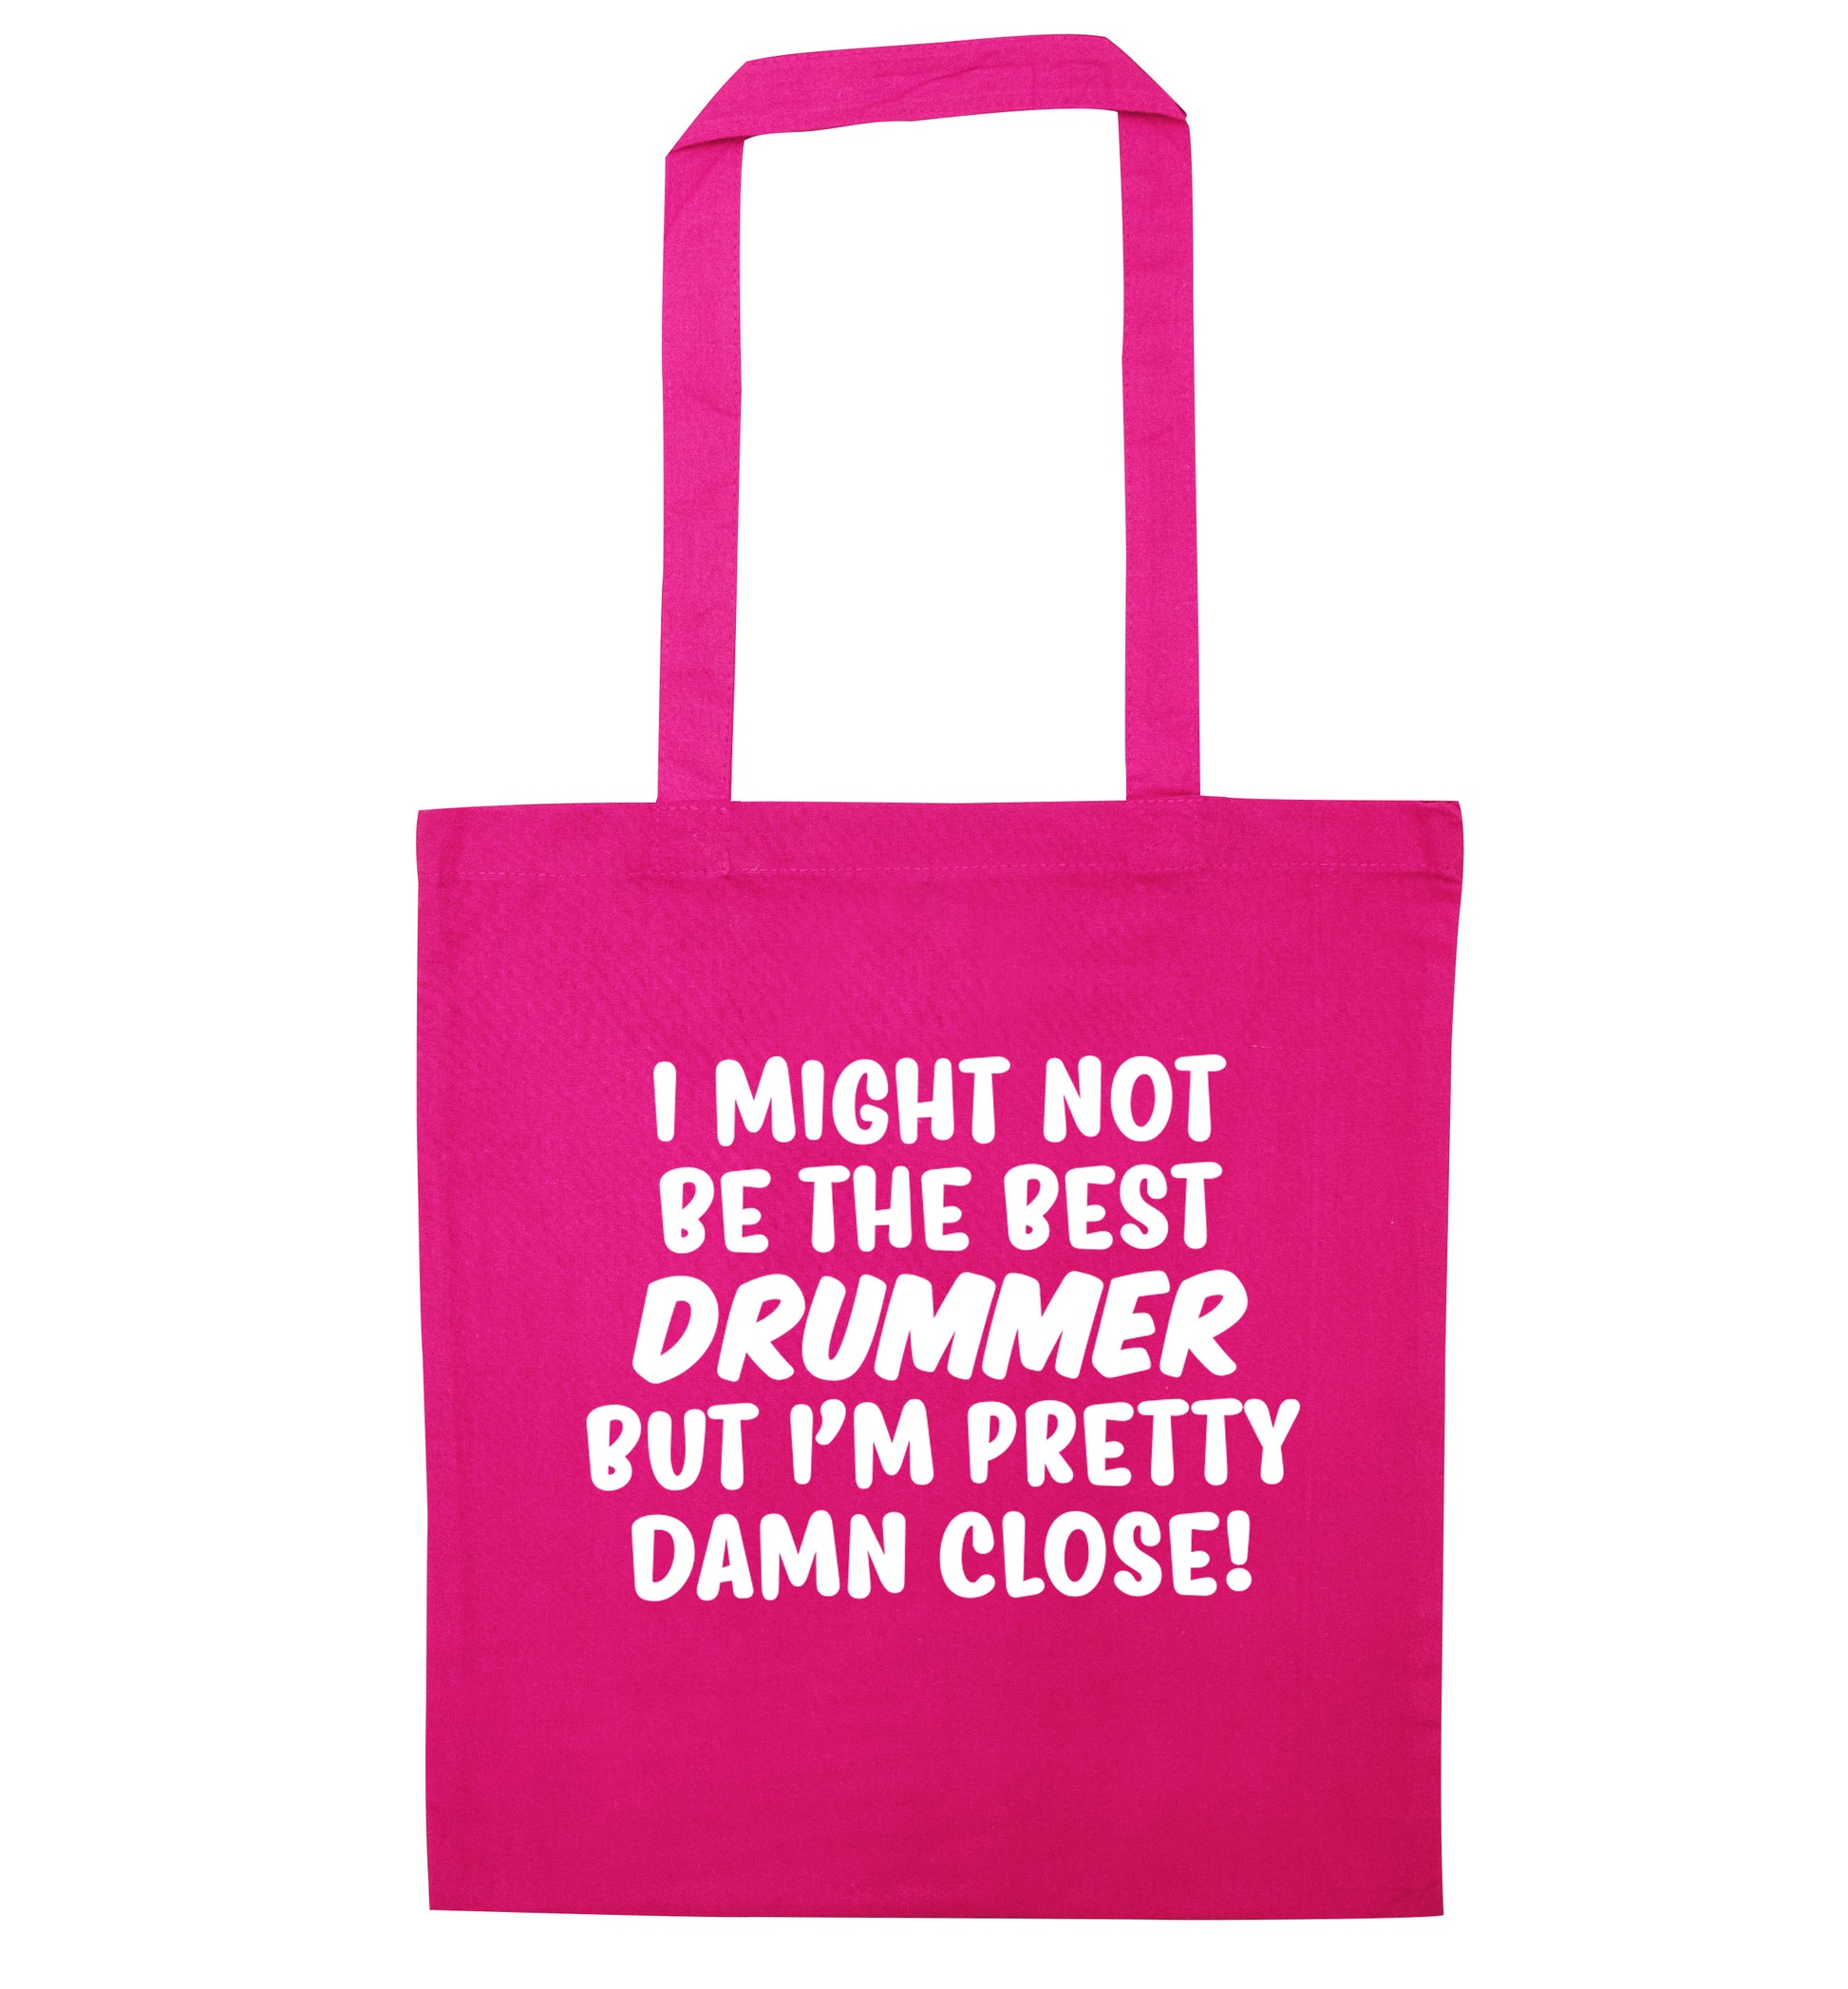 I might not be the best drummer but I'm pretty close! pink tote bag